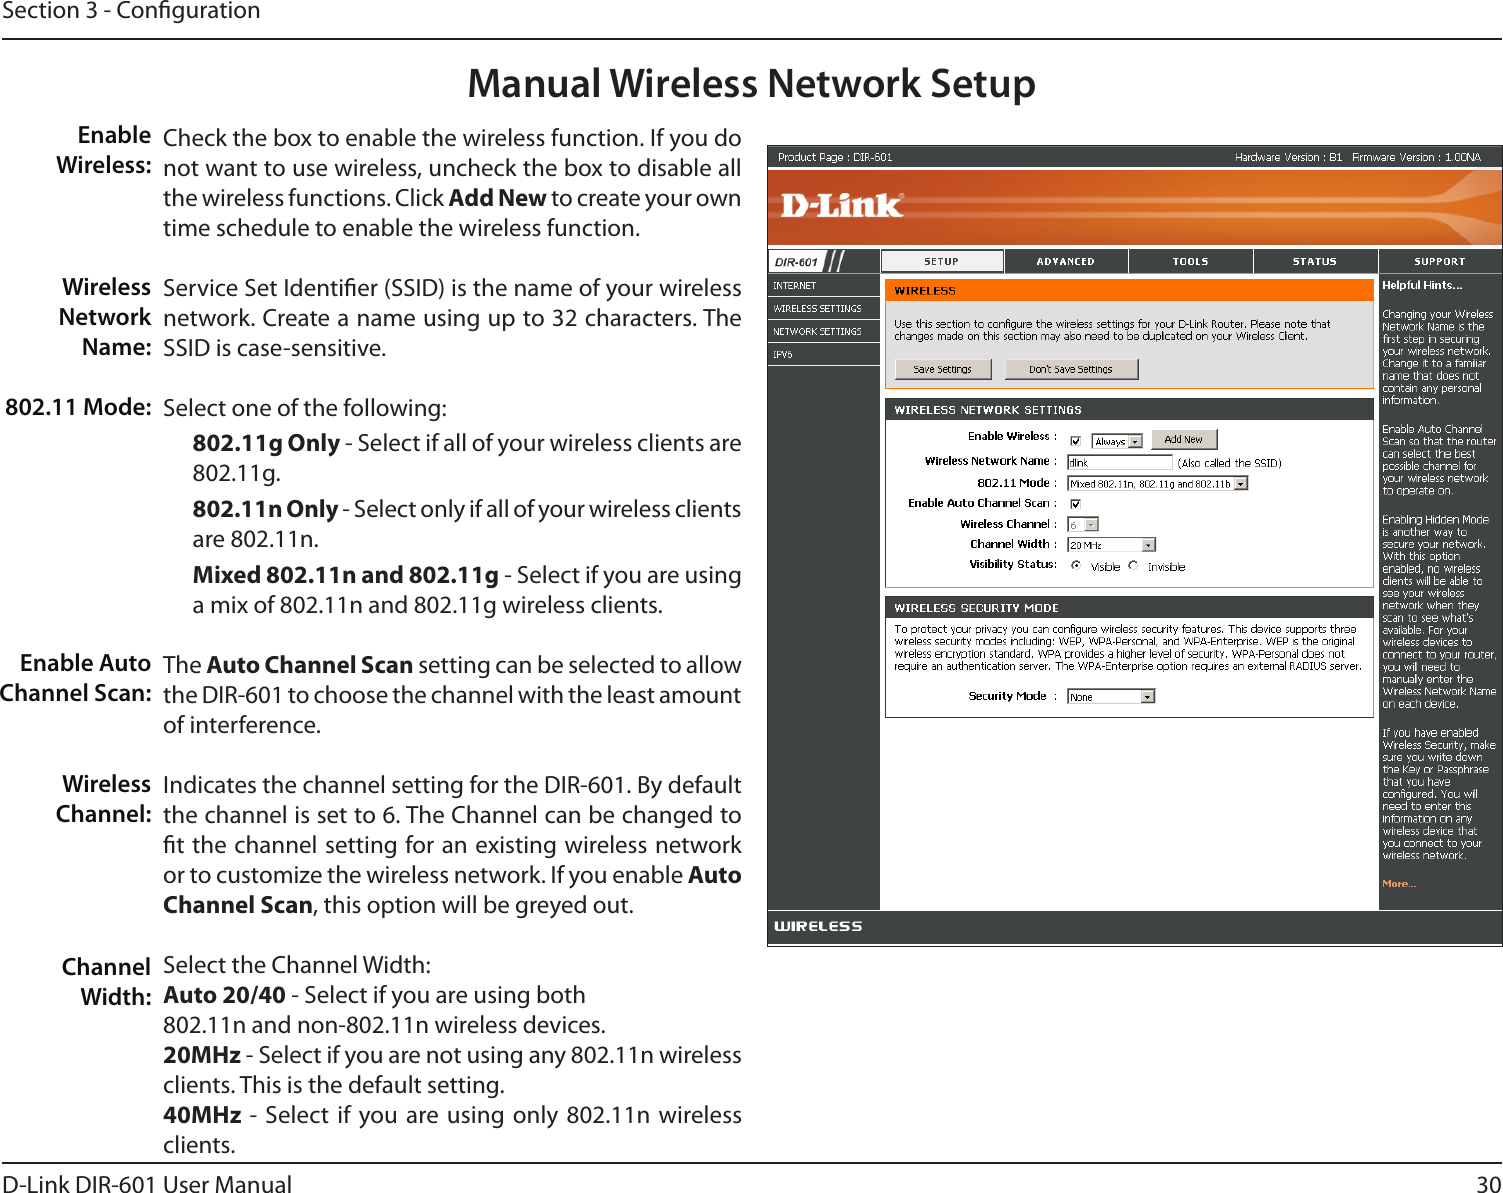 30D-Link DIR-601 User ManualSection 3 - CongurationManual Wireless Network SetupCheck the box to enable the wireless function. If you do not want to use wireless, uncheck the box to disable all the wireless functions. Click Add New to create your own time schedule to enable the wireless function. Service Set Identier (SSID) is the name of your wireless network. Create a name using up to 32 characters. The SSID is case-sensitive.Select one of the following:802.11gOnly - Select if all of your wireless clients are 802.11g.802.11nOnly - Select only if all of your wireless clients are 802.11n.Mixed802.11nand802.11g - Select if you are using a mix of 802.11n and 802.11g wireless clients.The AutoChannelScan setting can be selected to allow the DIR-601 to choose the channel with the least amount of interference.Indicates the channel setting for the DIR-601. By default the channel is set to 6. The Channel can be changed to t the channel setting for an existing wireless network or to customize the wireless network. If you enable Auto ChannelScan, this option will be greyed out.Select the Channel Width:Auto20/40 - Select if you are using both 802.11n and non-802.11n wireless devices.20MHz - Select if you are not using any 802.11n wireless clients. This is the default setting. 40MHz -  Select if you are using only  802.11n wireless clients.  Enable Wireless:Wireless Network Name:802.11 Mode:Enable Auto Channel Scan:Wireless Channel:Channel Width: